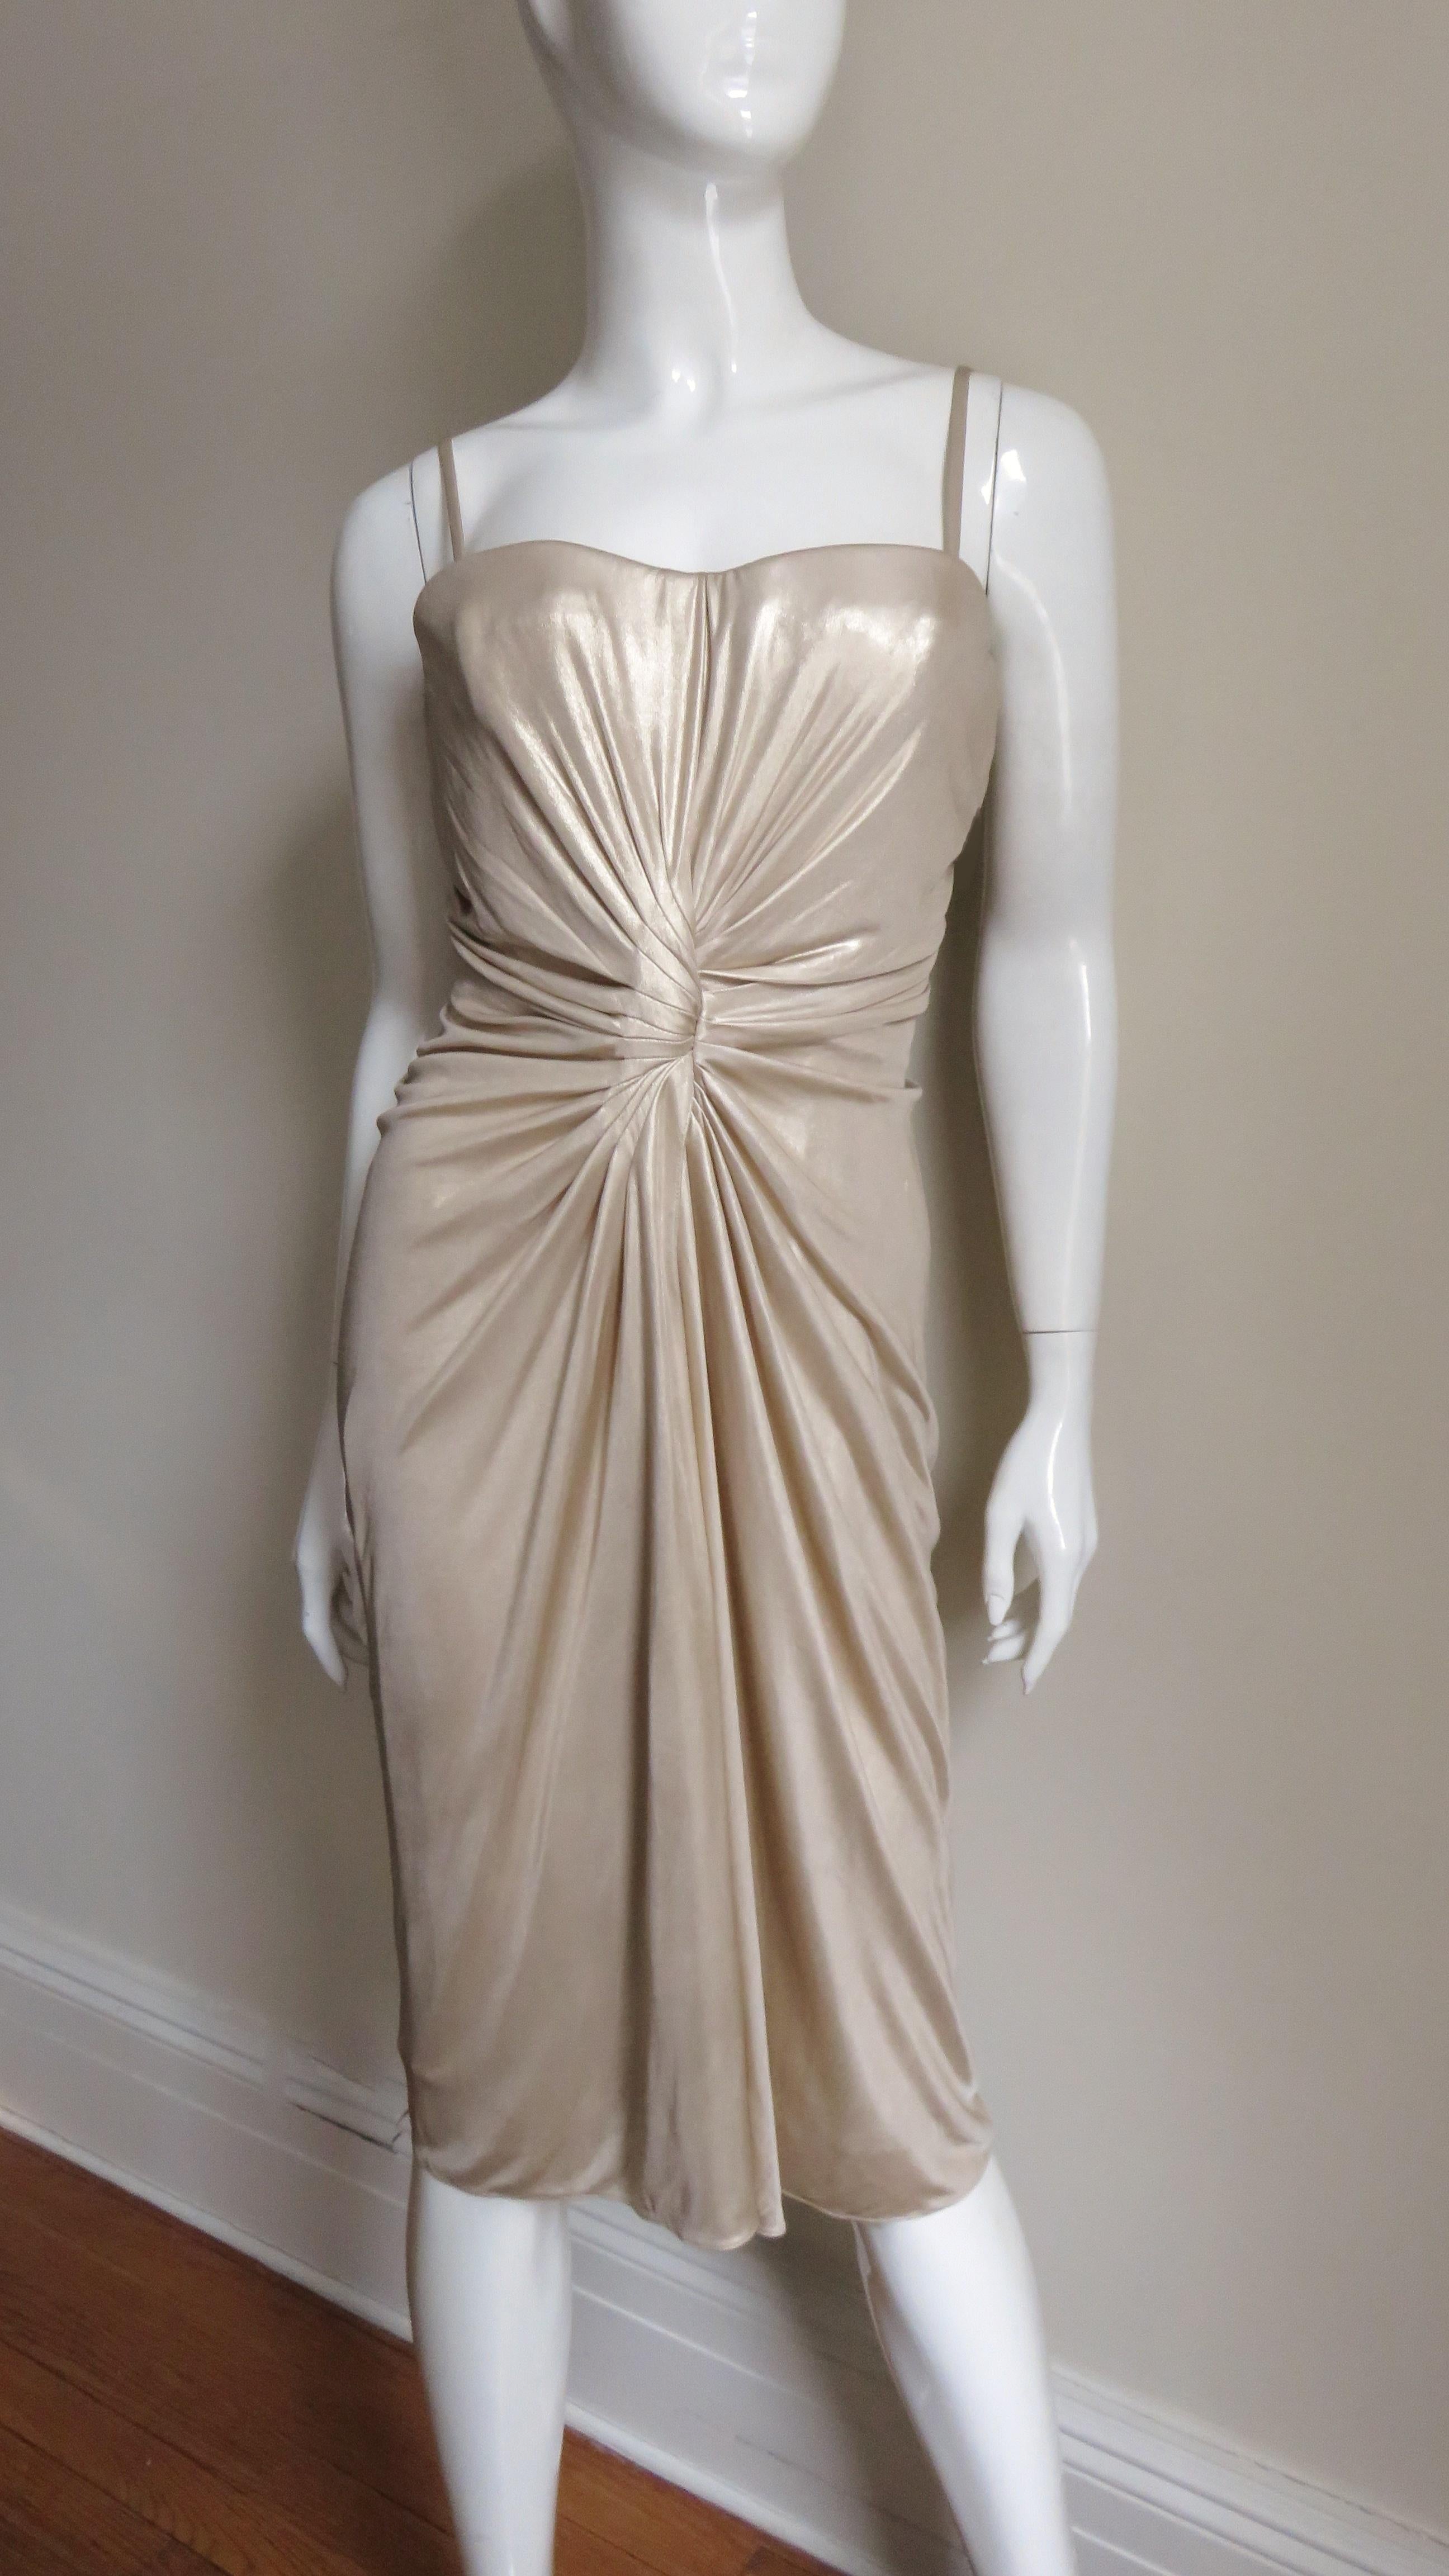 John Galliano for Christian Dior Ruched Corset Bustier Dress  In Good Condition For Sale In Water Mill, NY